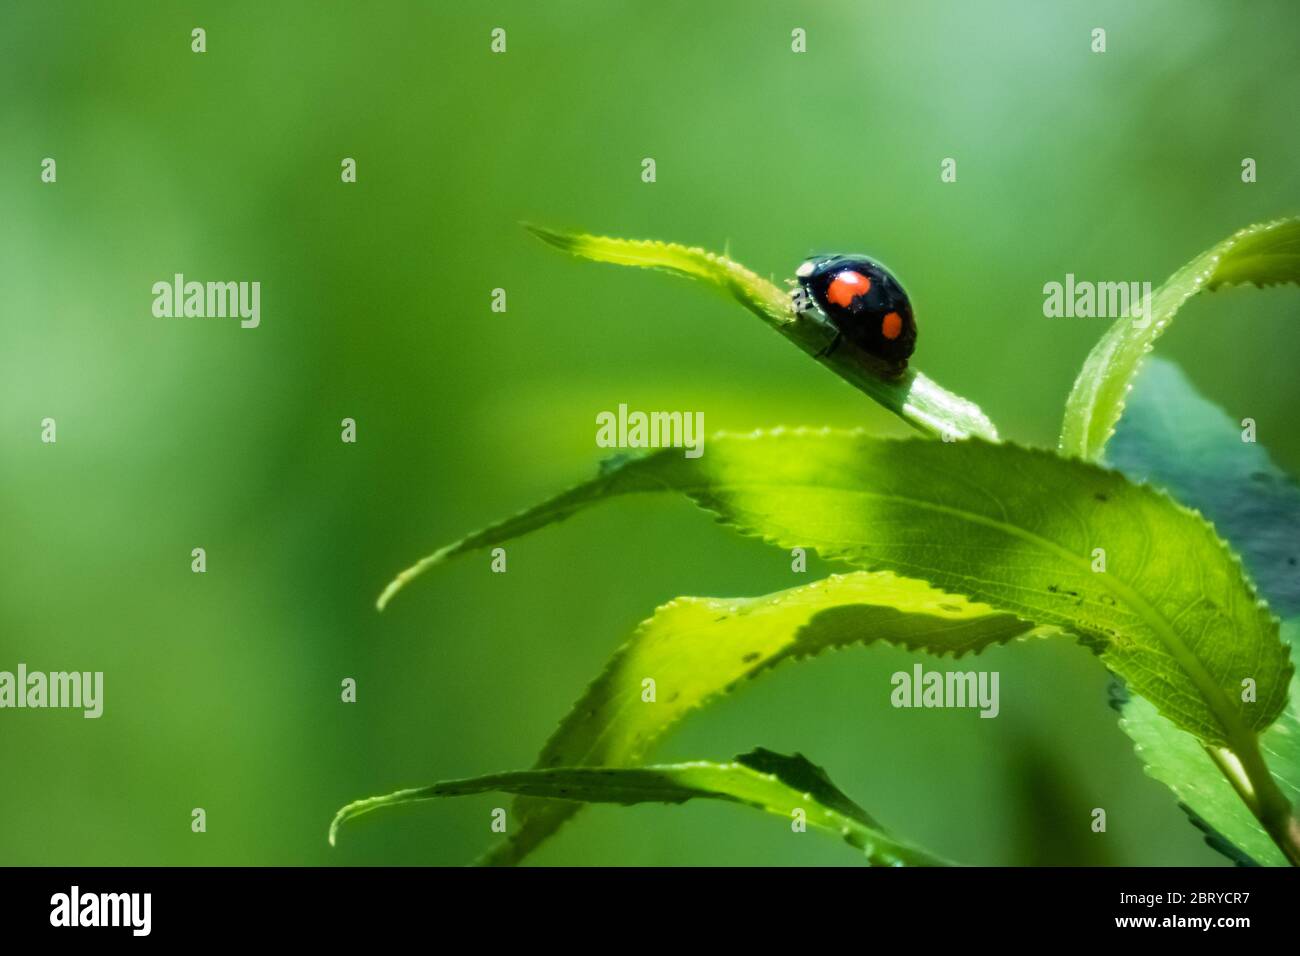 Close up of a twice-stabbed ladybug sitting on a leaf. Natural scene on green color, with copyspace on the left side. Stock Photo